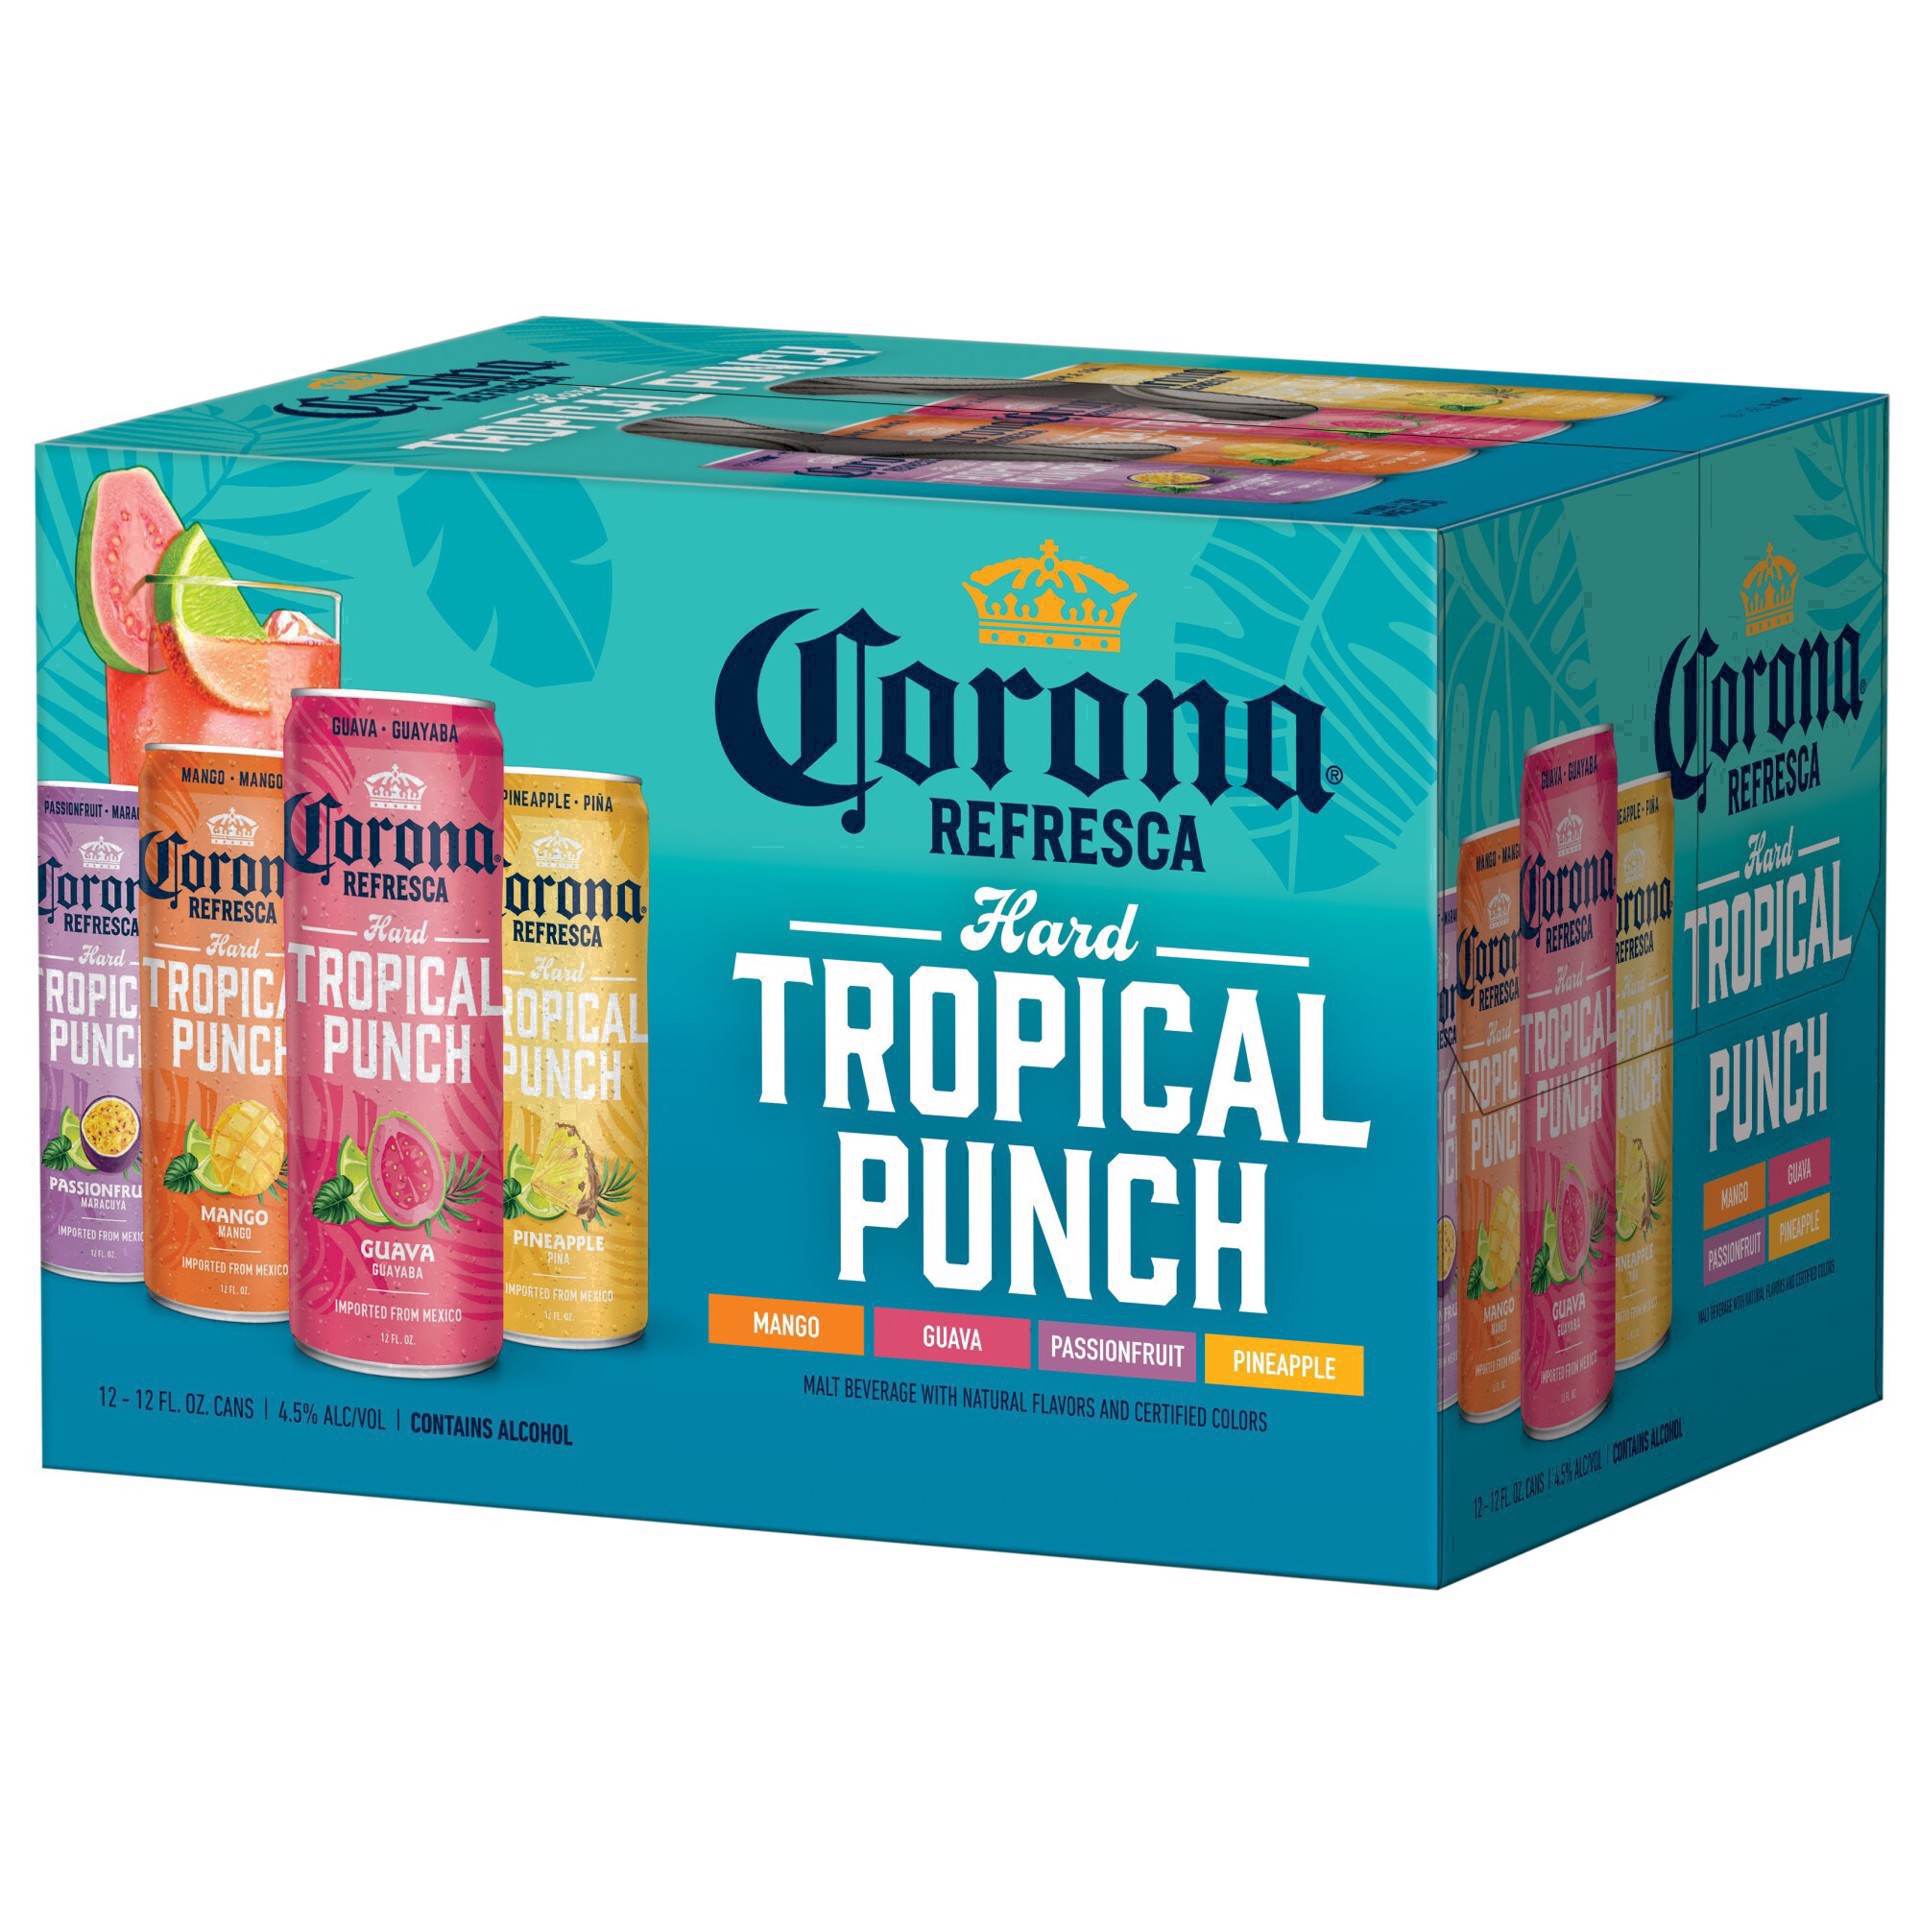 slide 68 of 113, Corona Refresca Hard Tropical Punch Variety Pack Cans, 144 fl oz